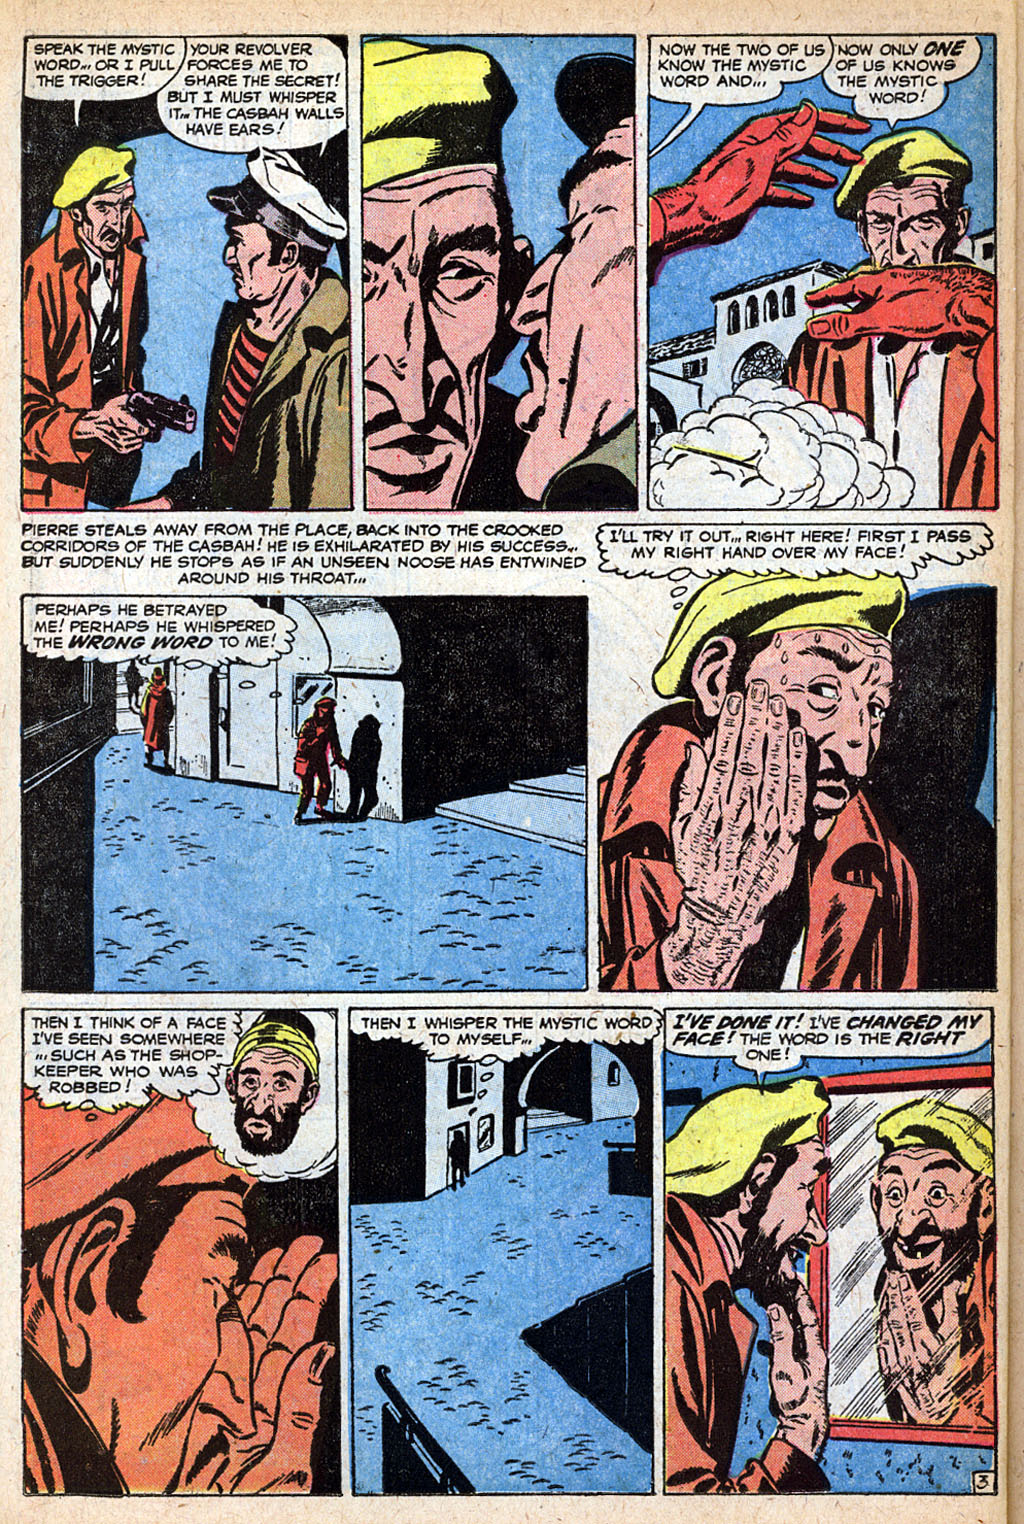 Marvel Tales (1949) 156 Page 13